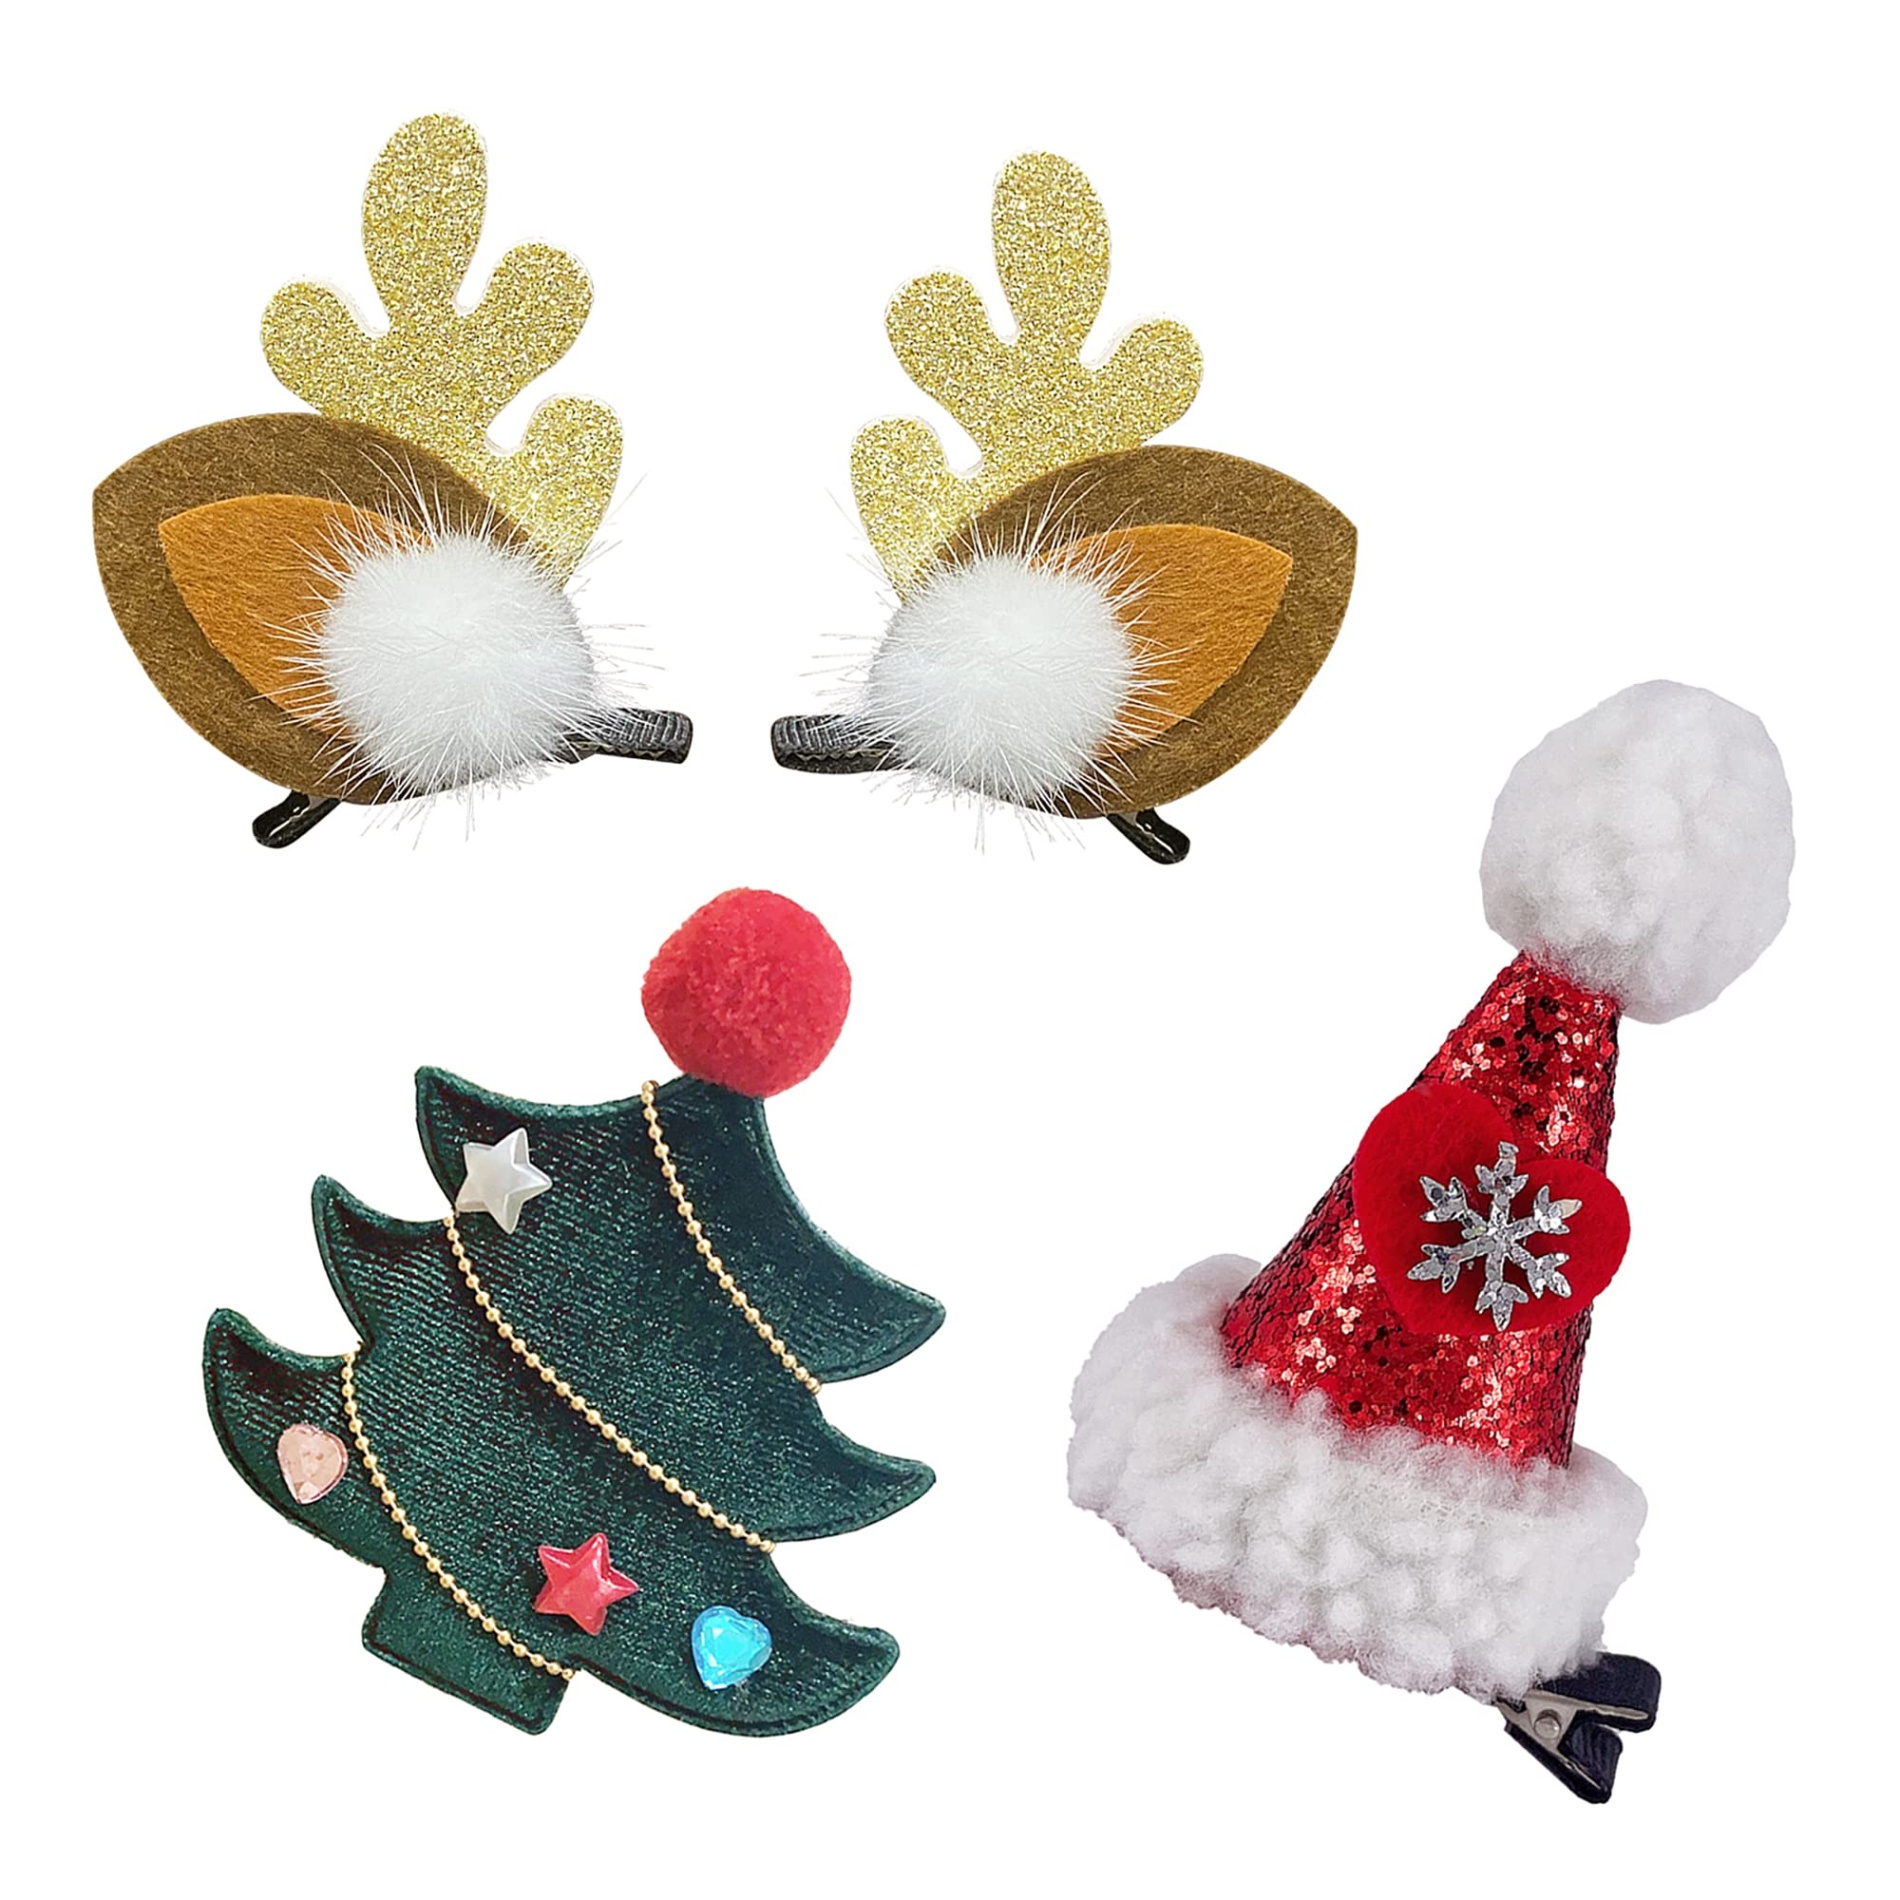 Get Festive With These Trendy Christmas Hair Accessories!